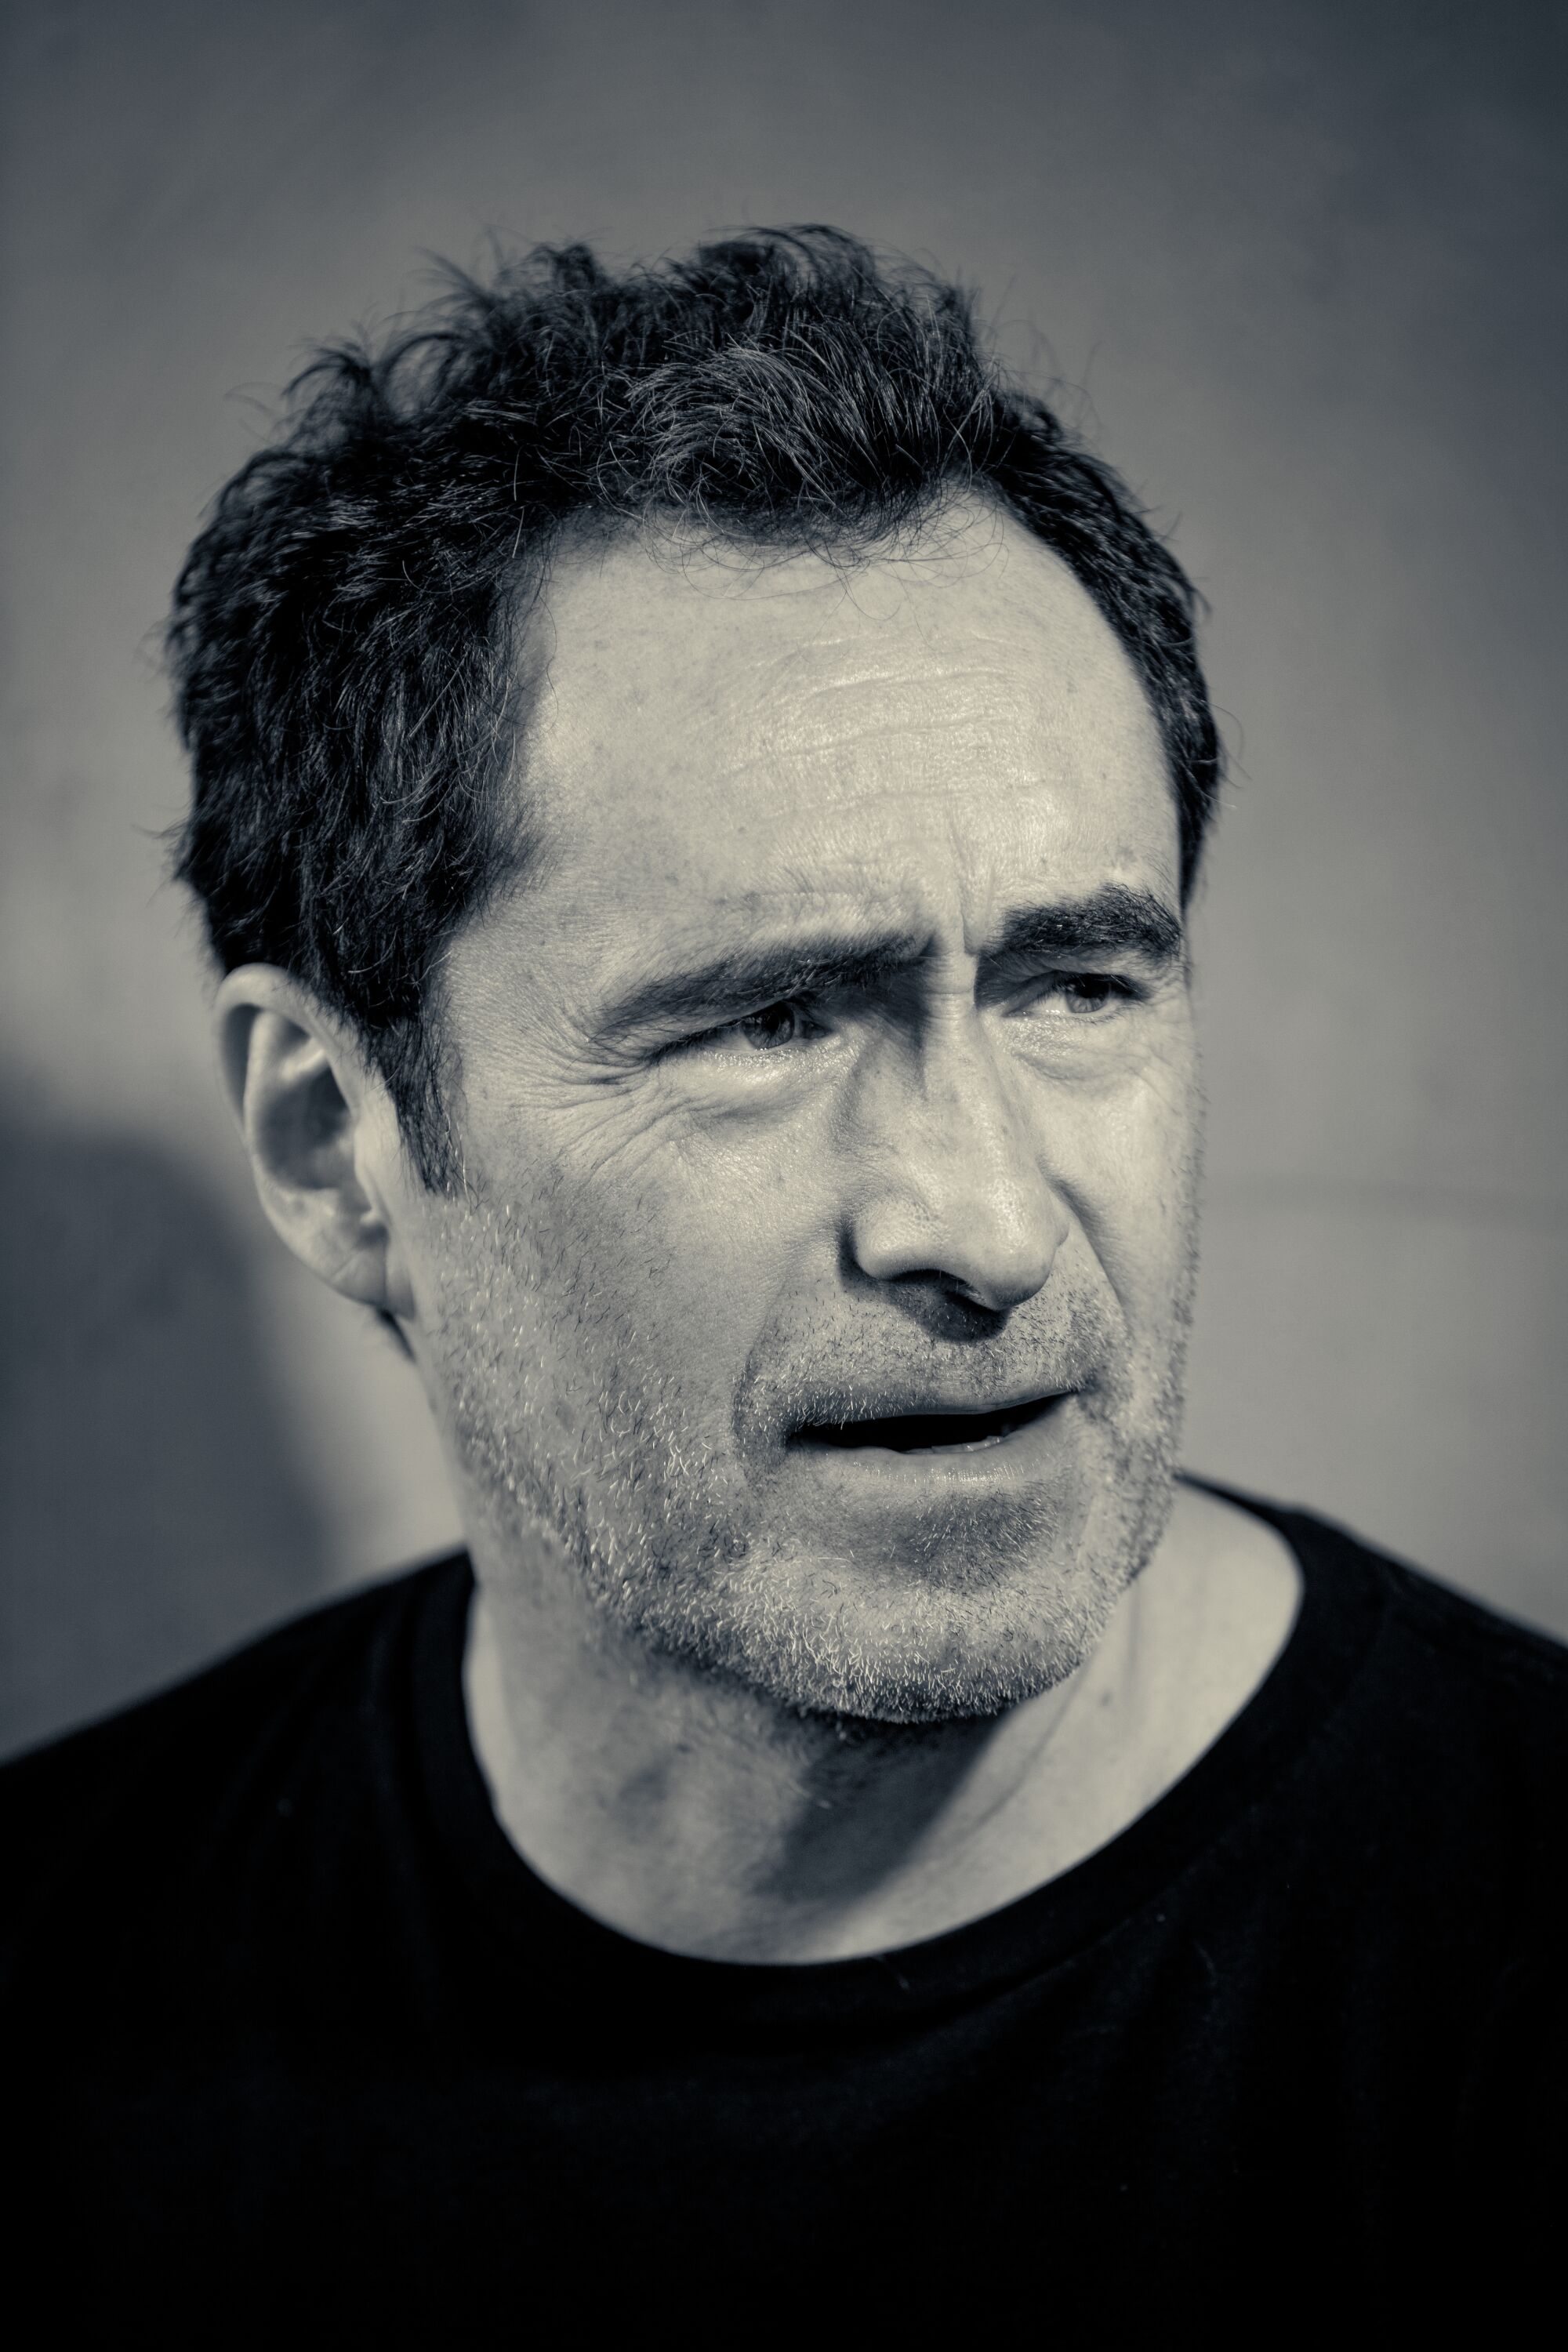 A black-and-white image of Demián Bichir